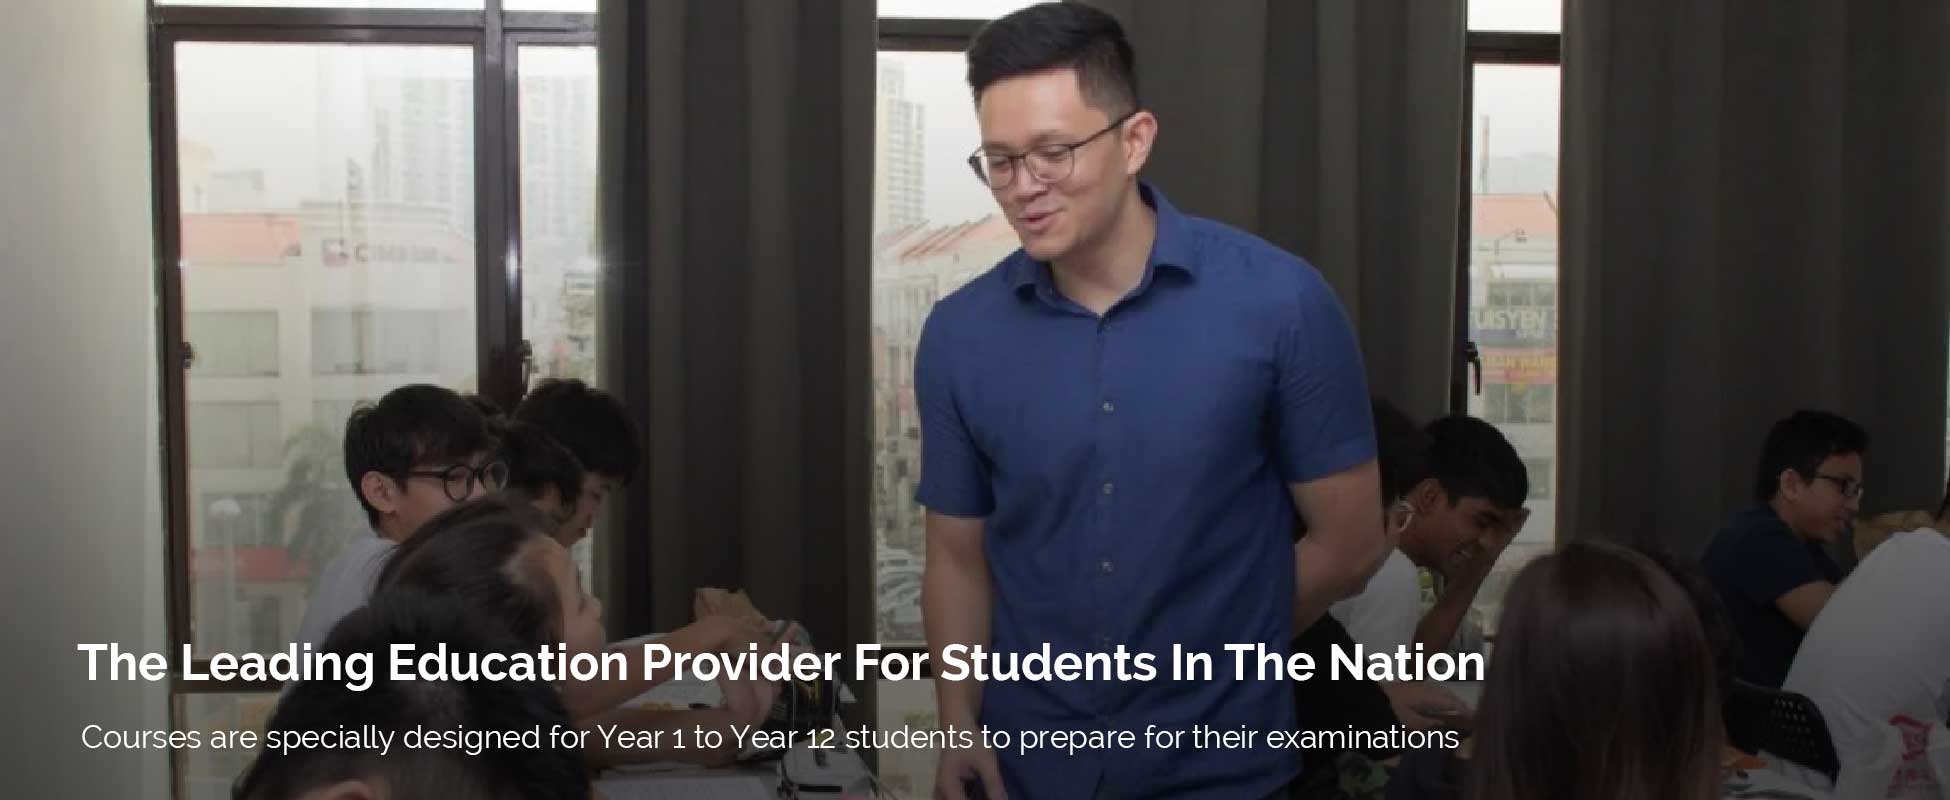 vbest,vbest tuition,igcse tuition,a-level,igcse tuition centre,a-level tuition VBEST Tuition 🏆 16 Centres Nationwide & Online Tuition VBest Year 1 to Year 12 Tuition Centre